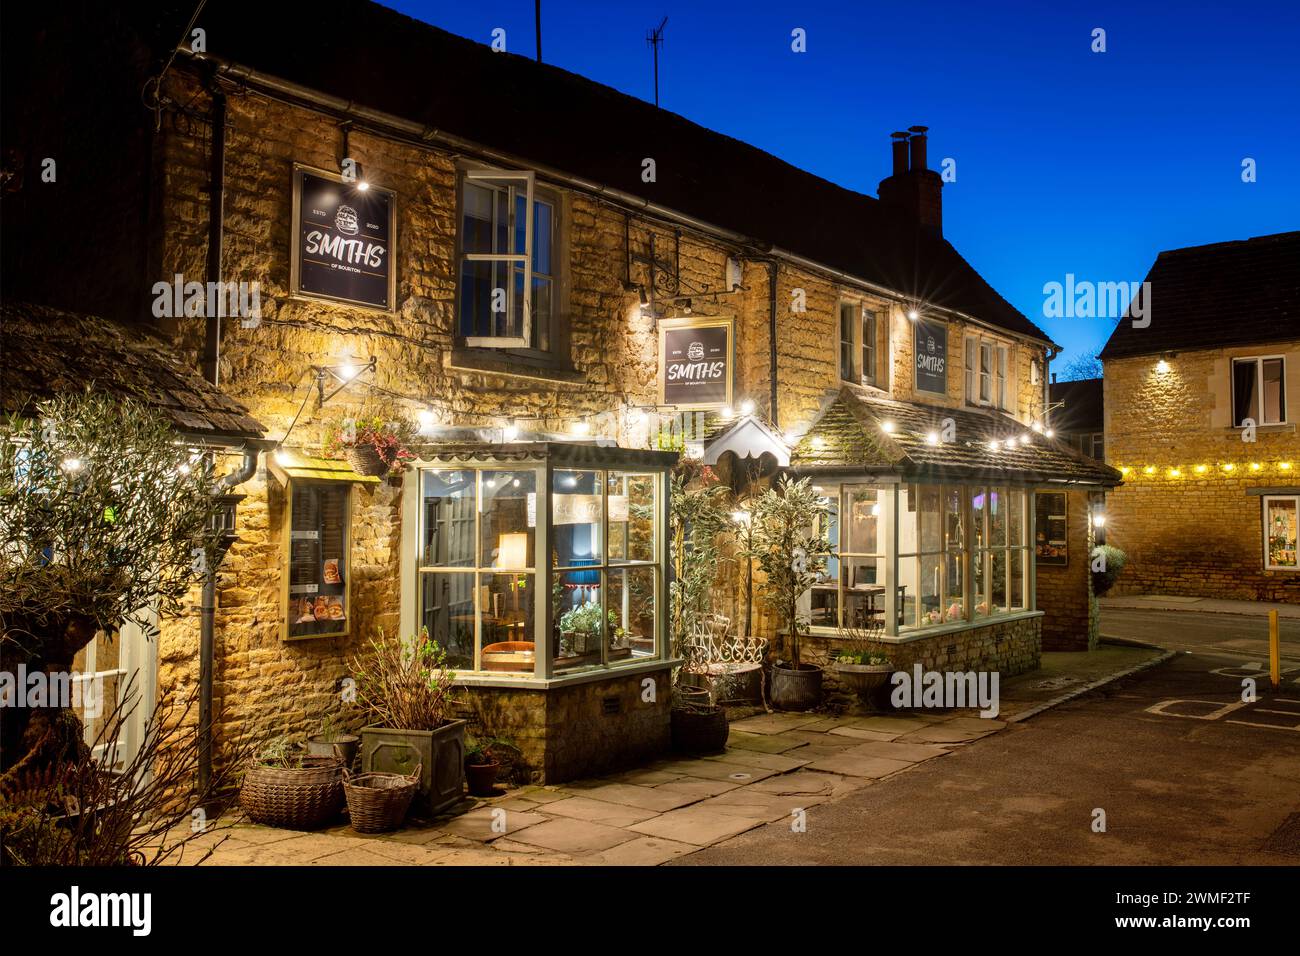 Ristorante Smiths of Bourton. Bourton on the Water, Cotswolds, Gloucestershire, Inghilterra Foto Stock